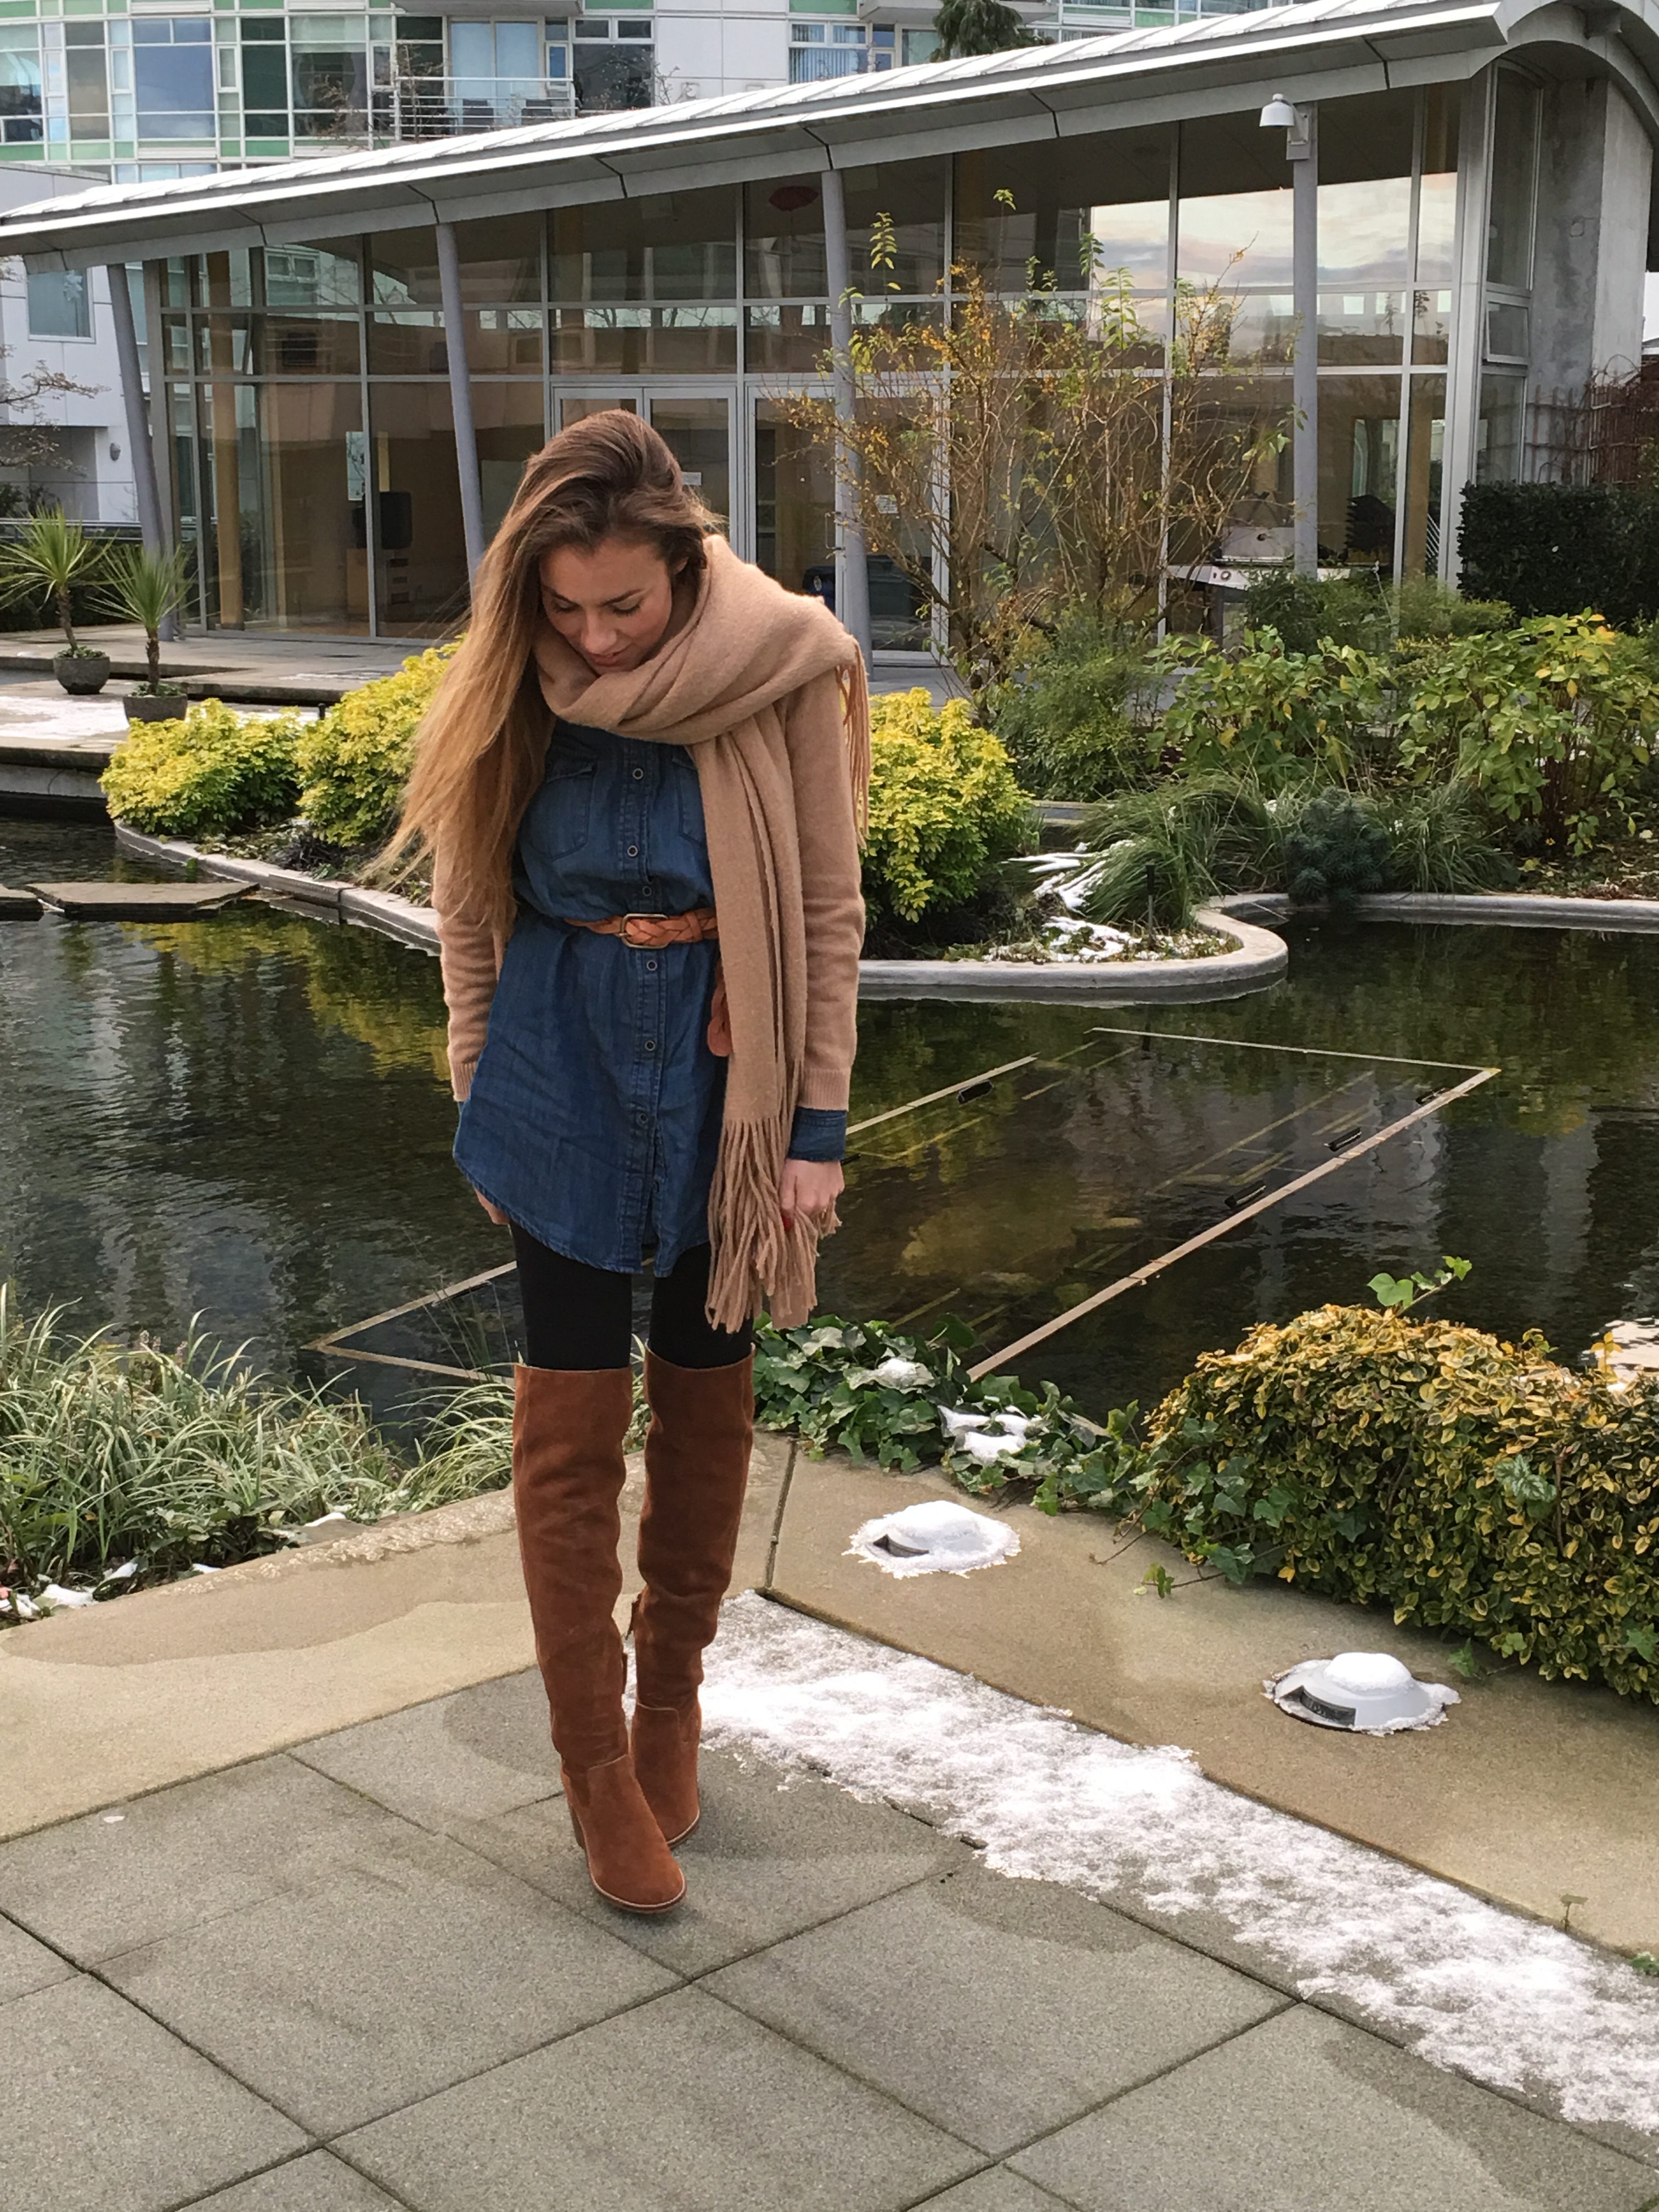 Over-The-Knee Boot Outfits To Copy For Fall